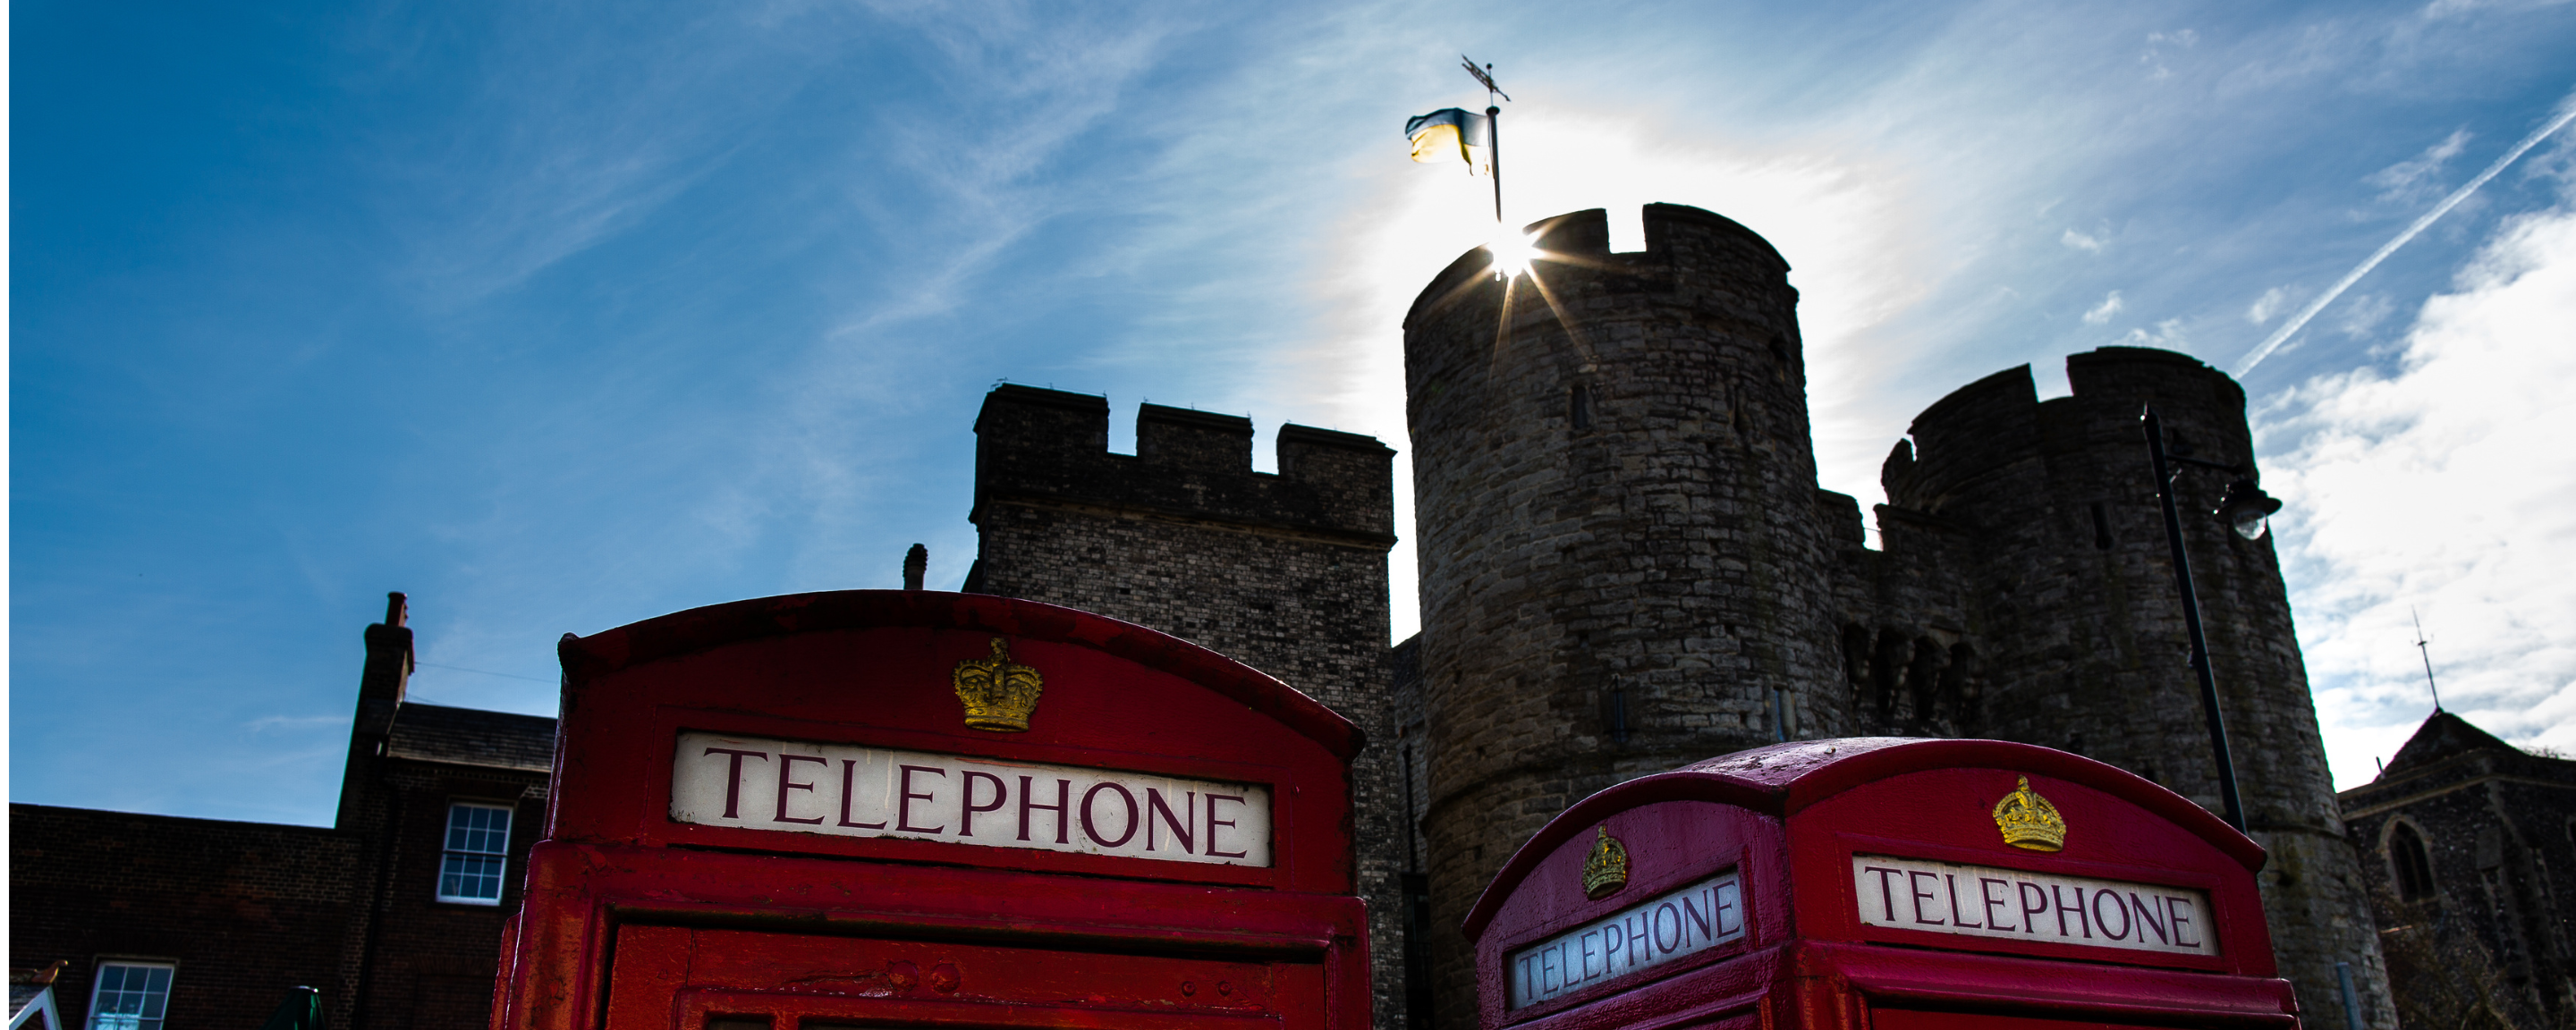 Canterbury Castle behind red telephone boxes